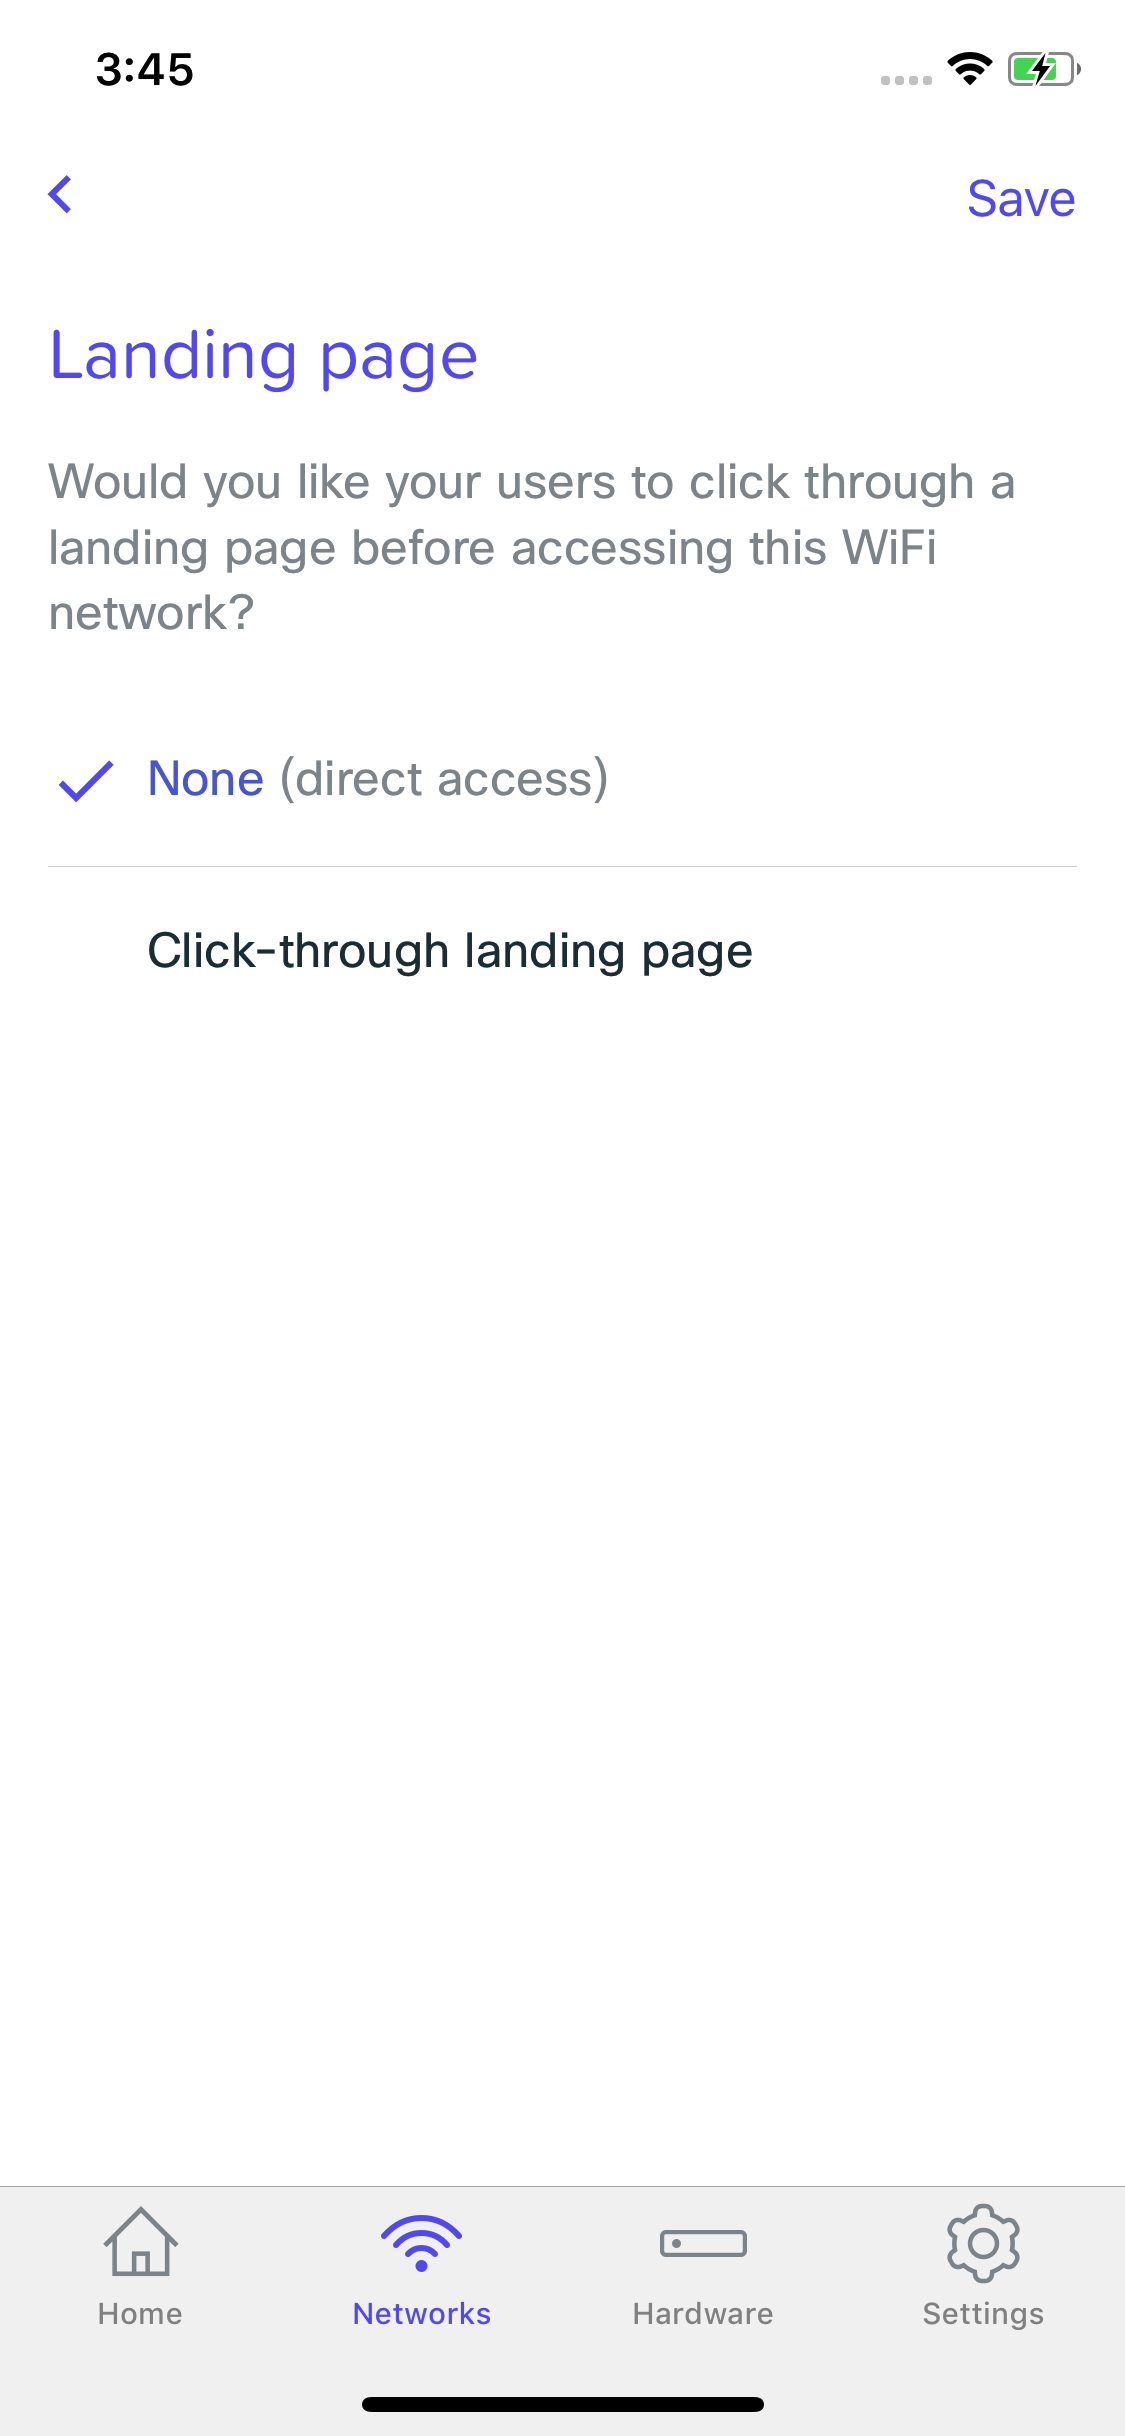 None landing page